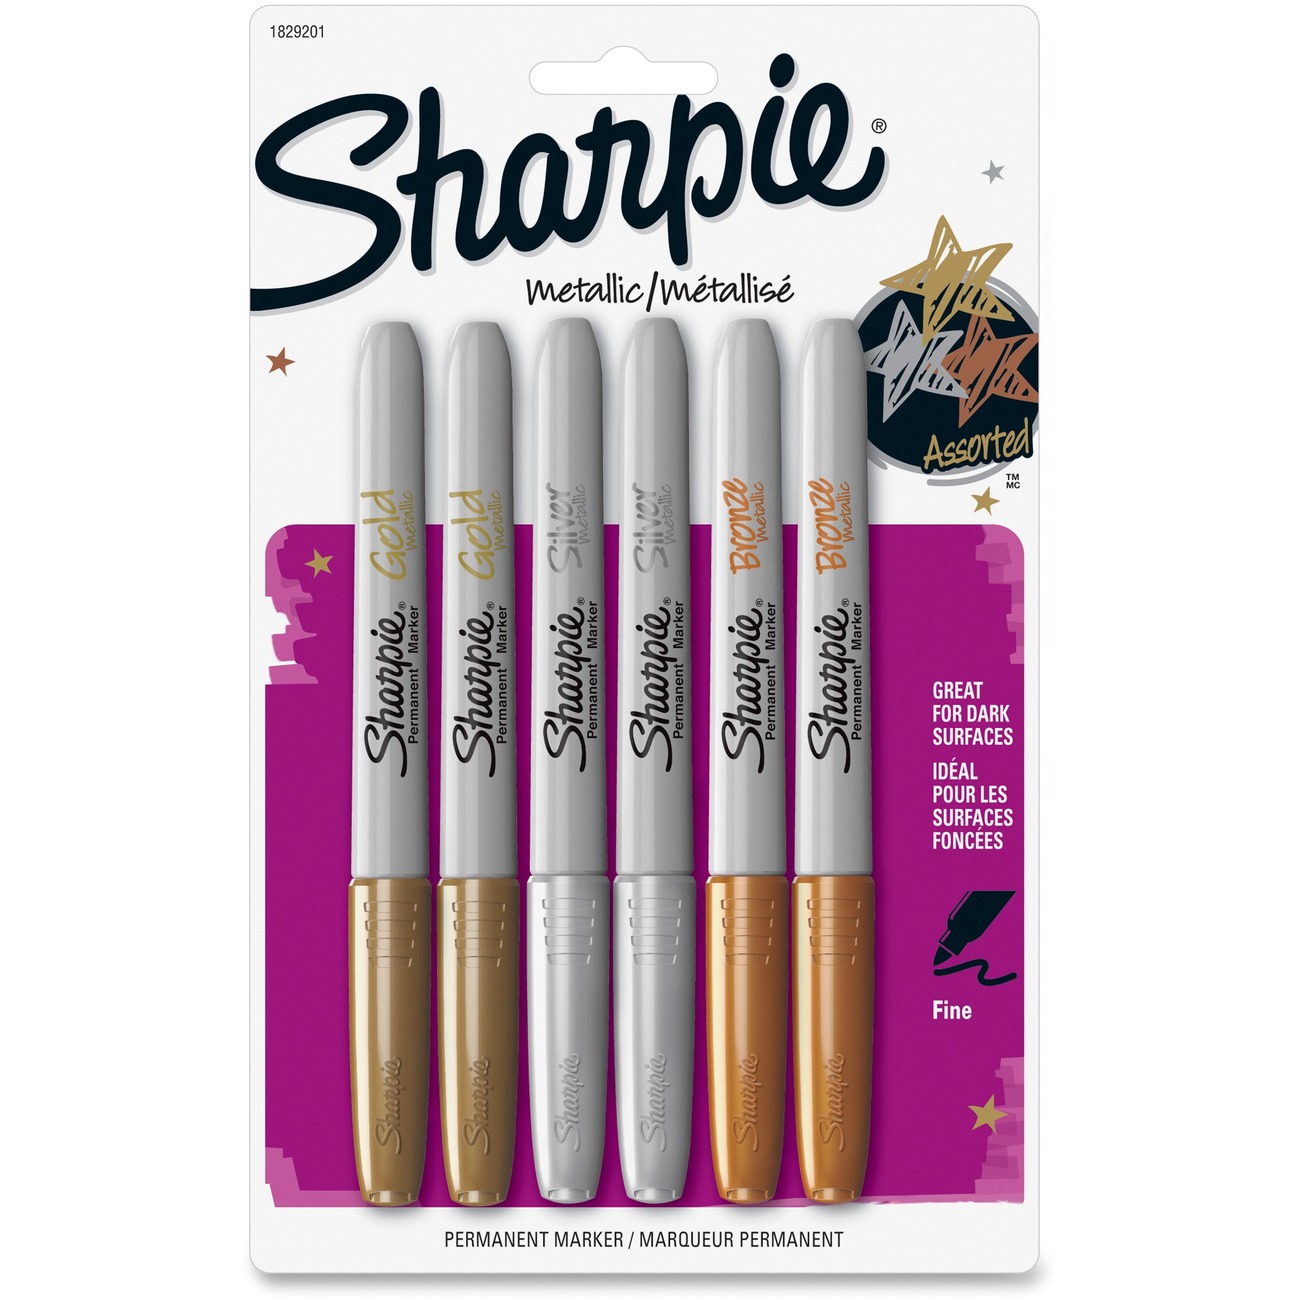 Sharpie Pen-style Permanent Marker - Fine Marker Point - Black Alcohol  Based Ink - 1 / Box - R&A Office Supplies